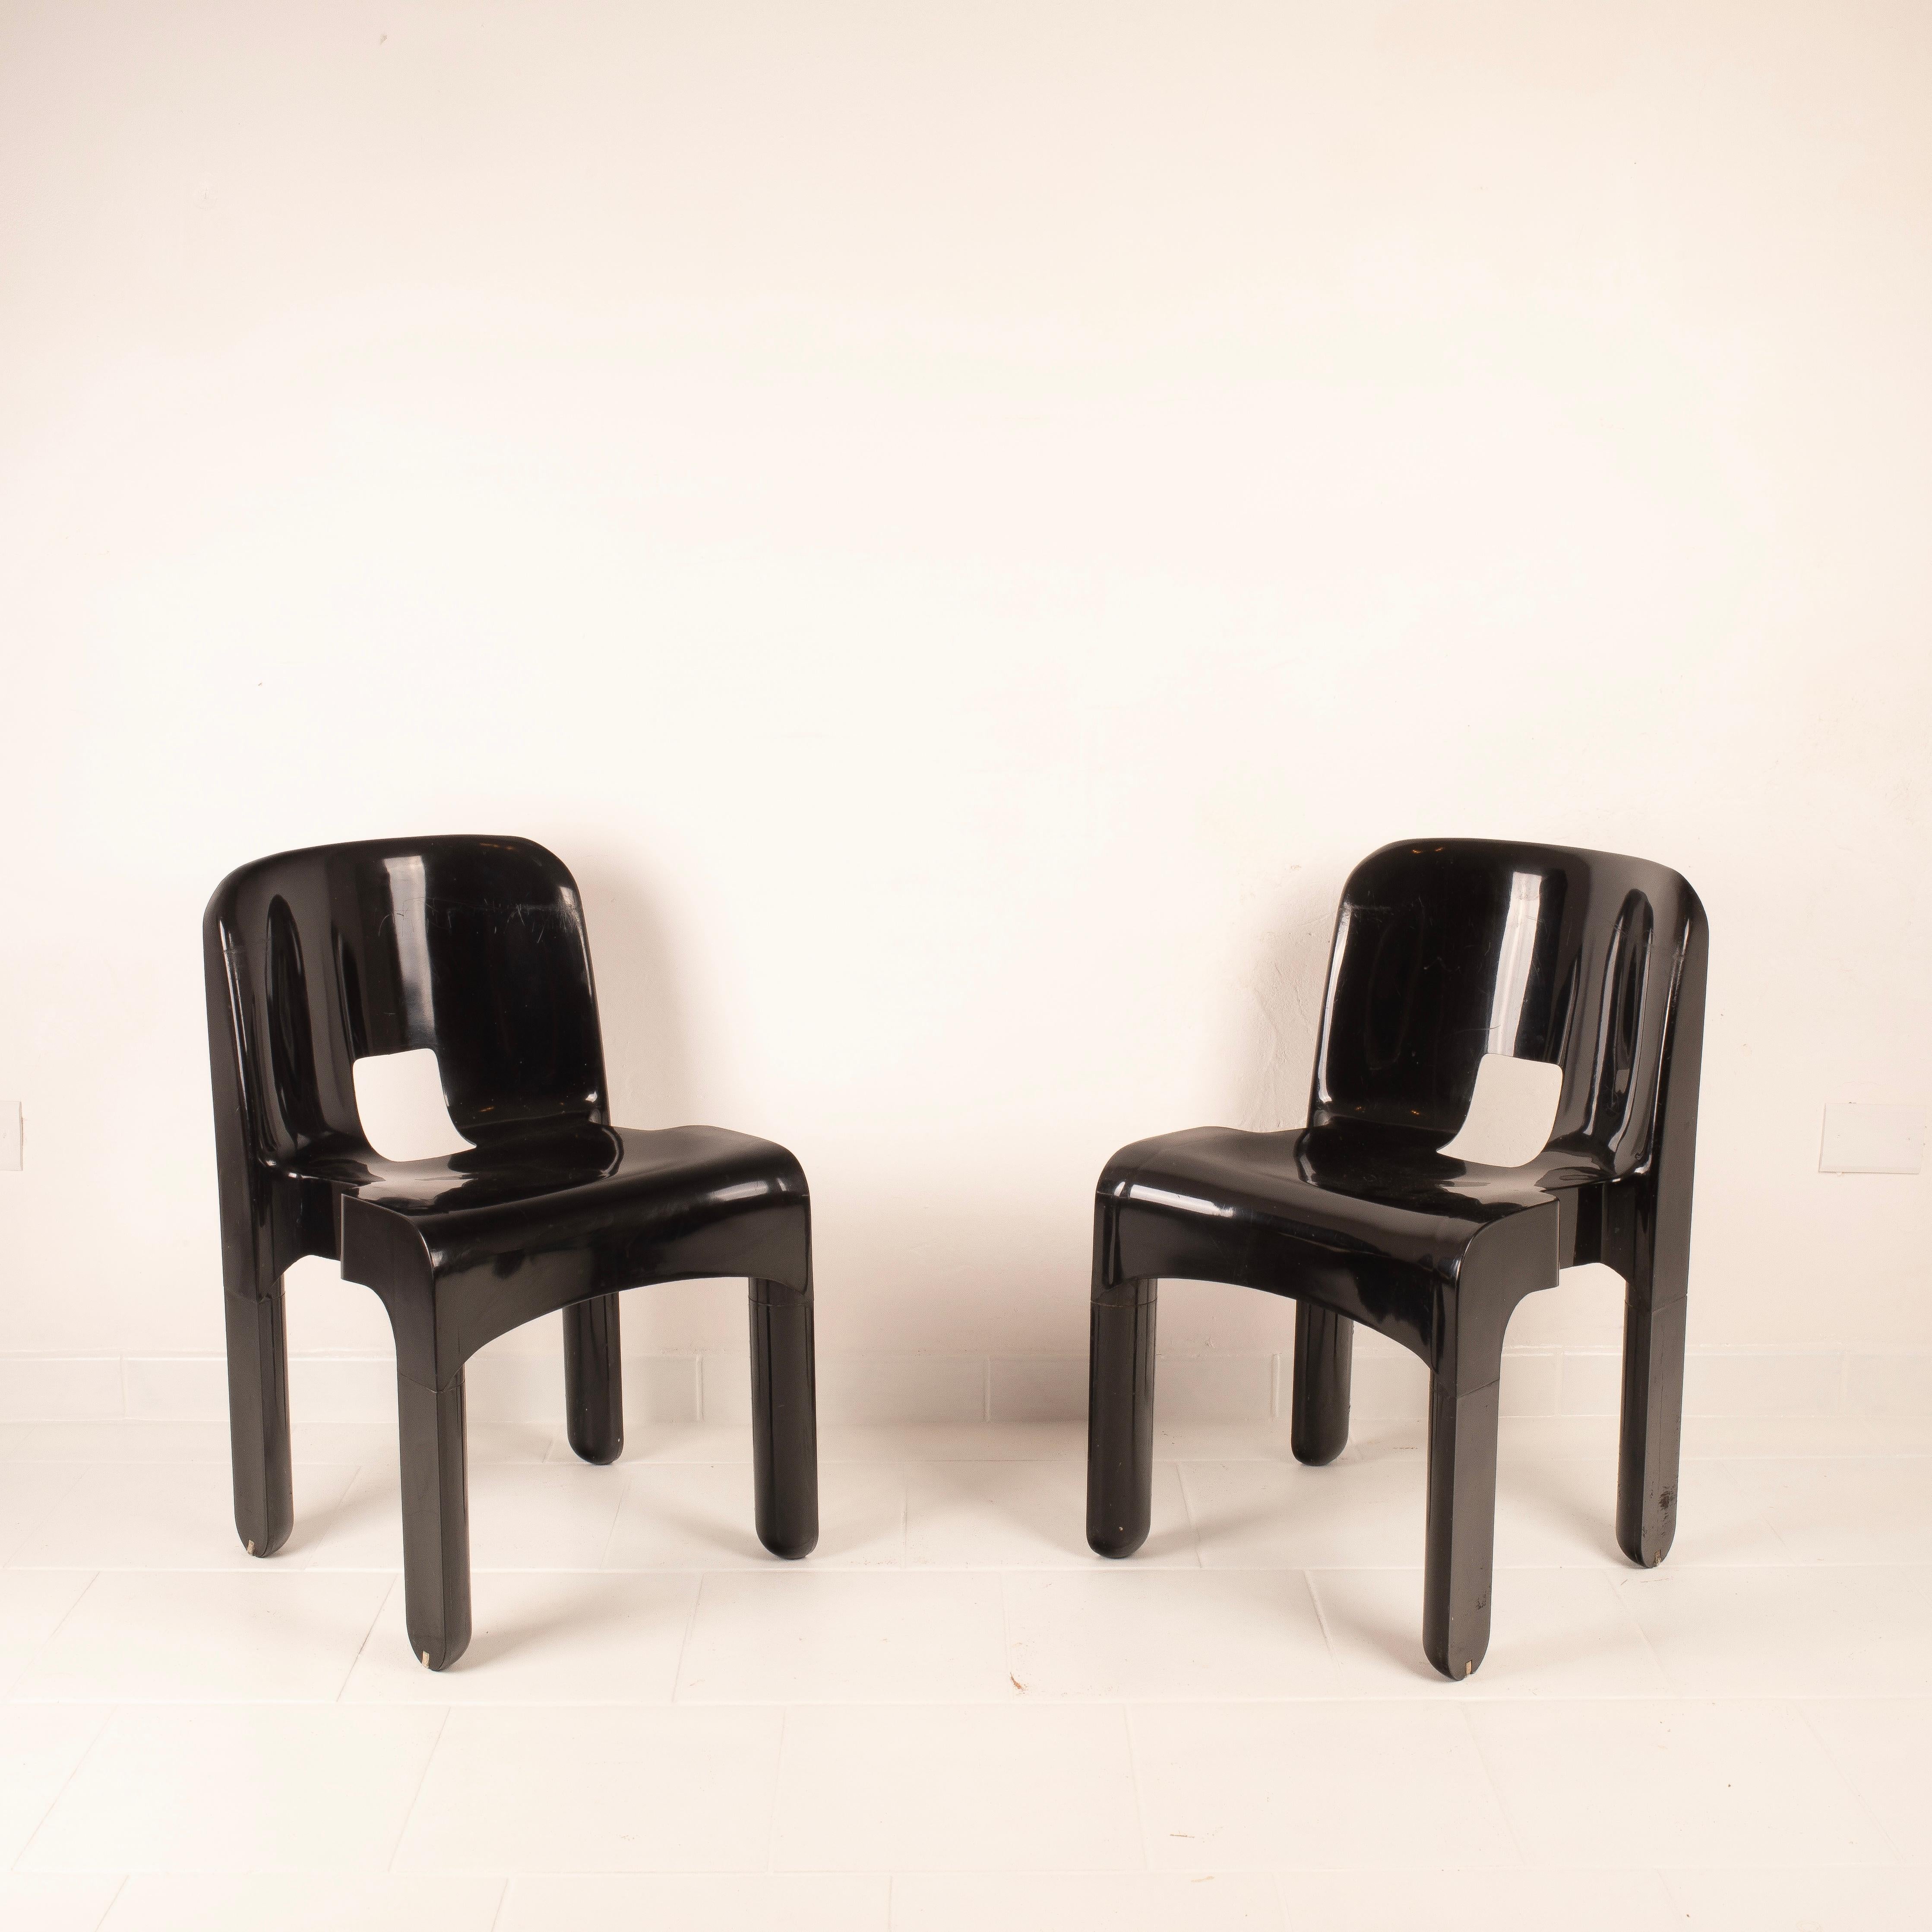 Italian Pair of Universal Chairs 4869 Black by Joe Colombo for Kartell For Sale